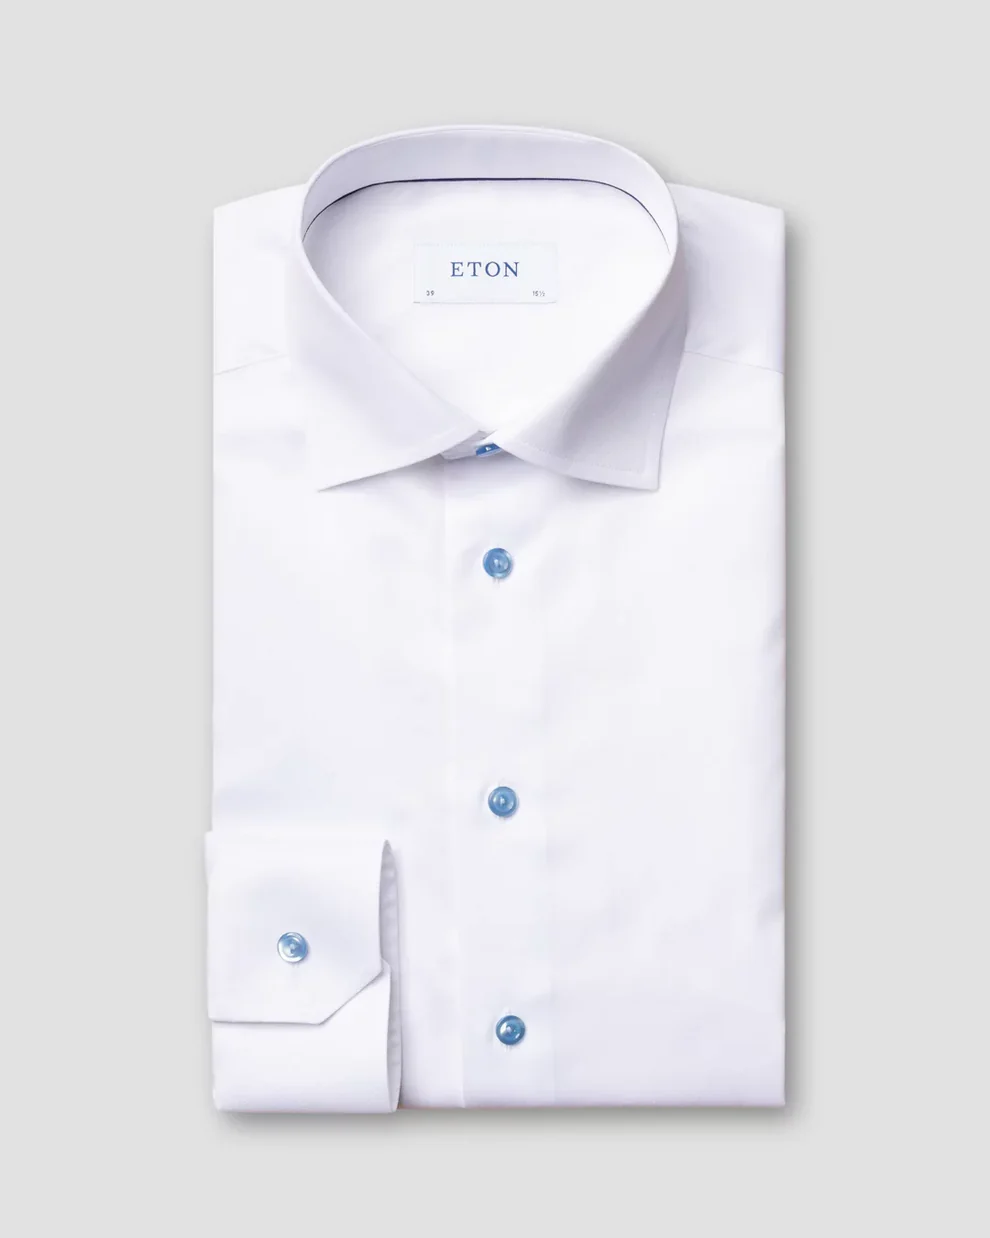 ETON Plain Shirt With Contrast Button Single Cuff Contemporary Fit WHITE